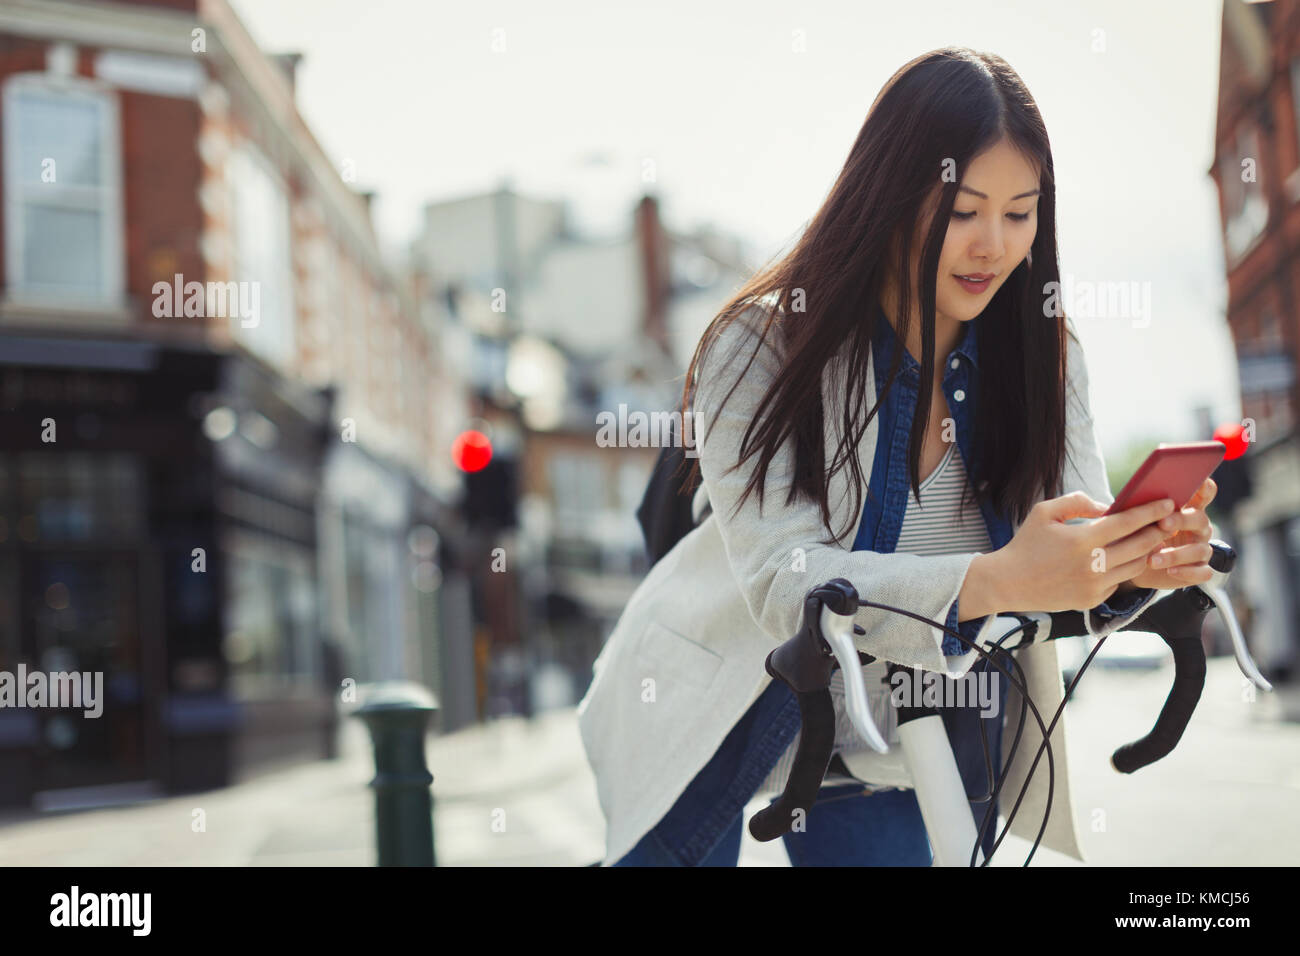 Young woman commuting on bicycle, texting with cell phone on sunny urban street Stock Photo